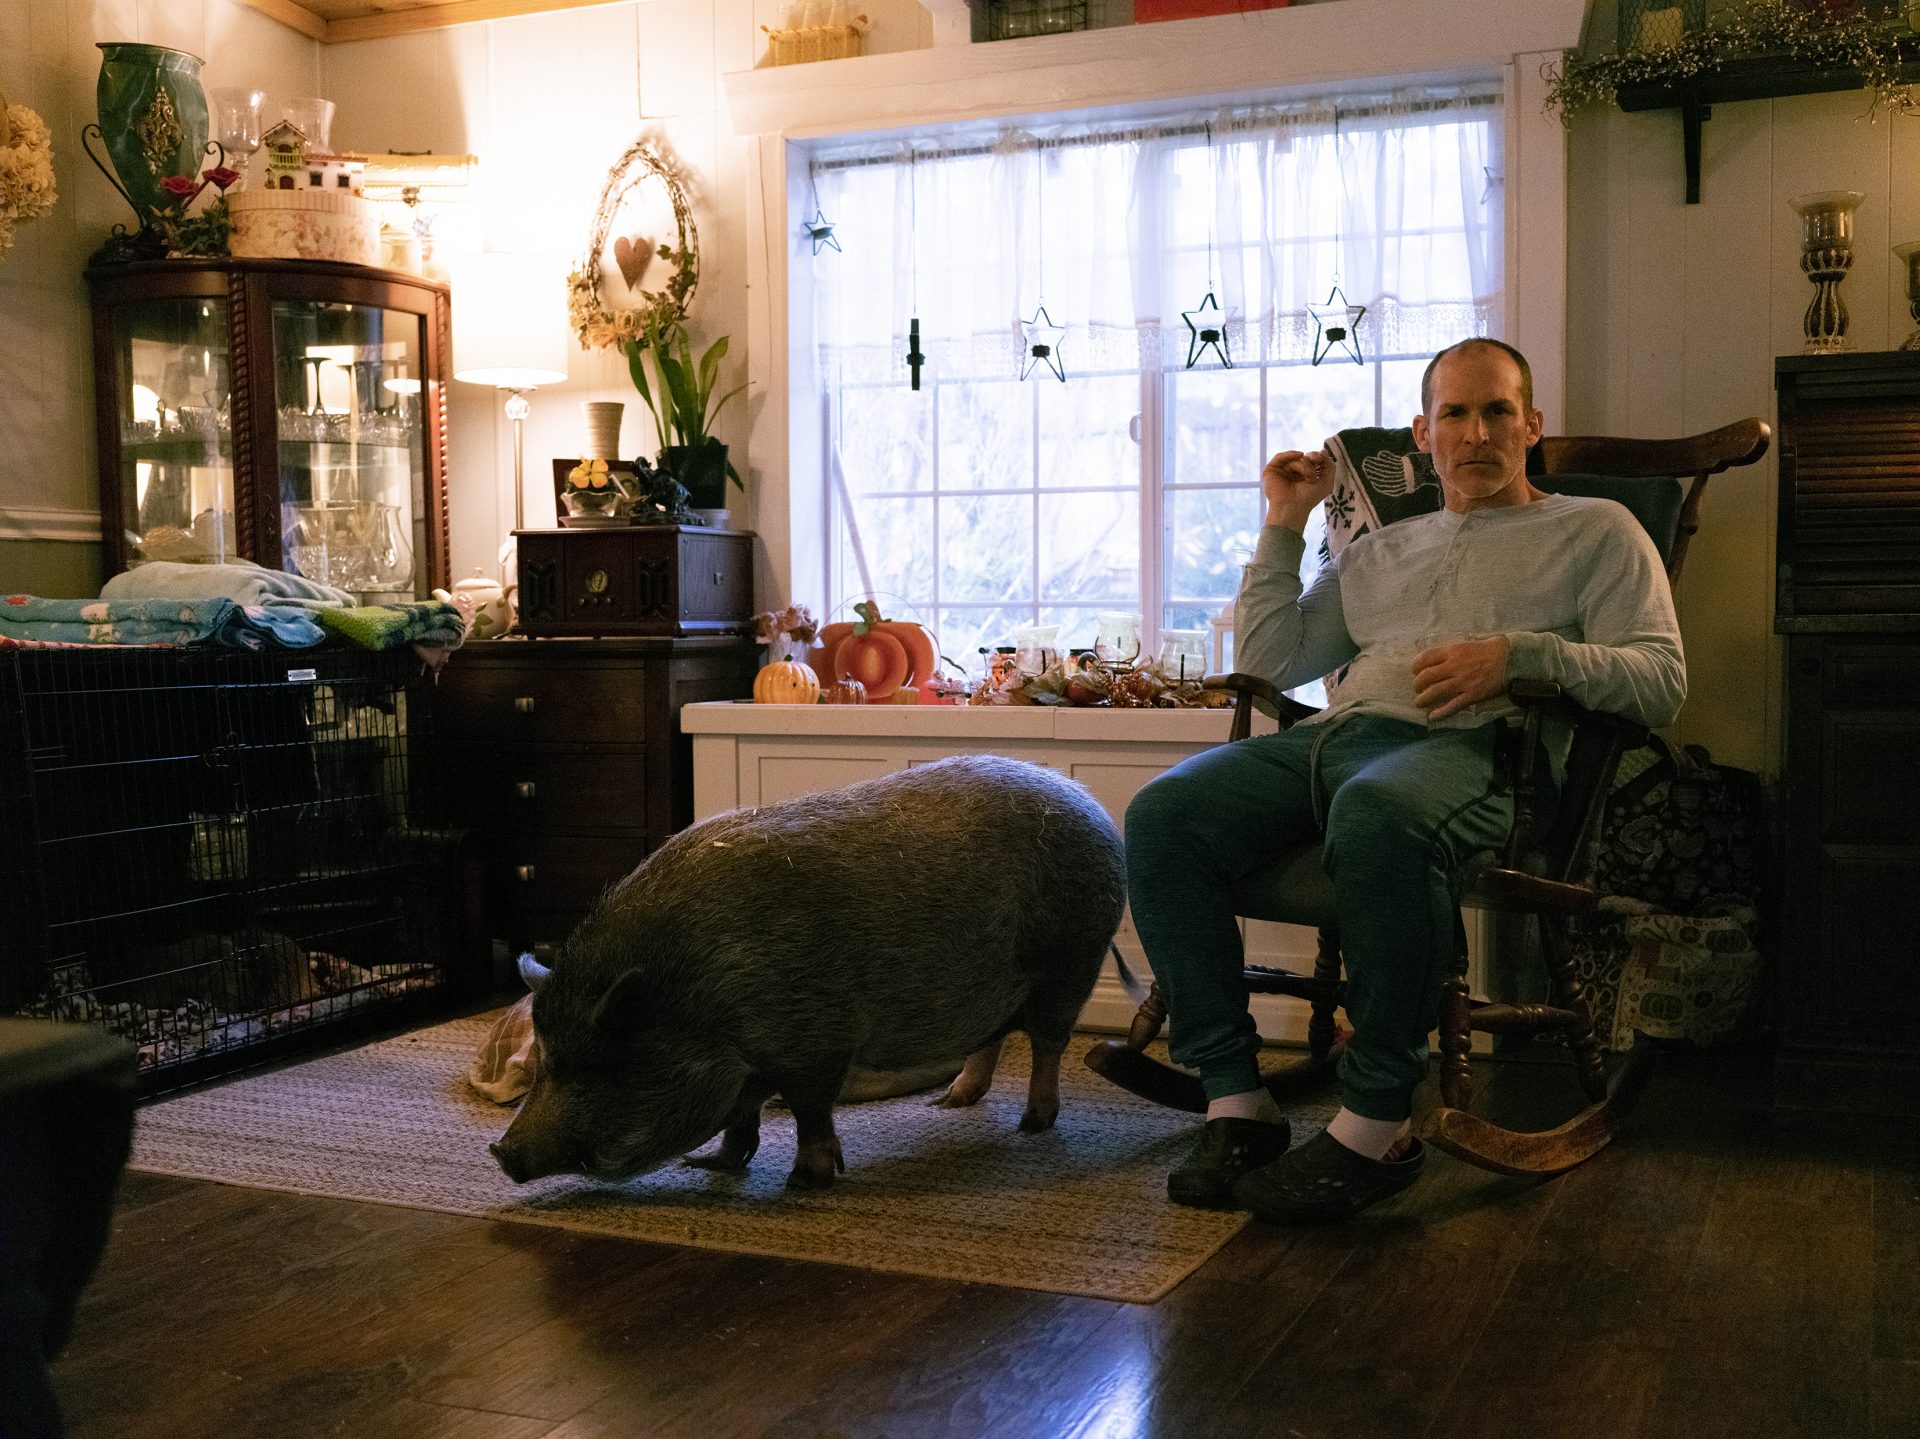 Chuck at home with Rosebud, his mother's pet pig.